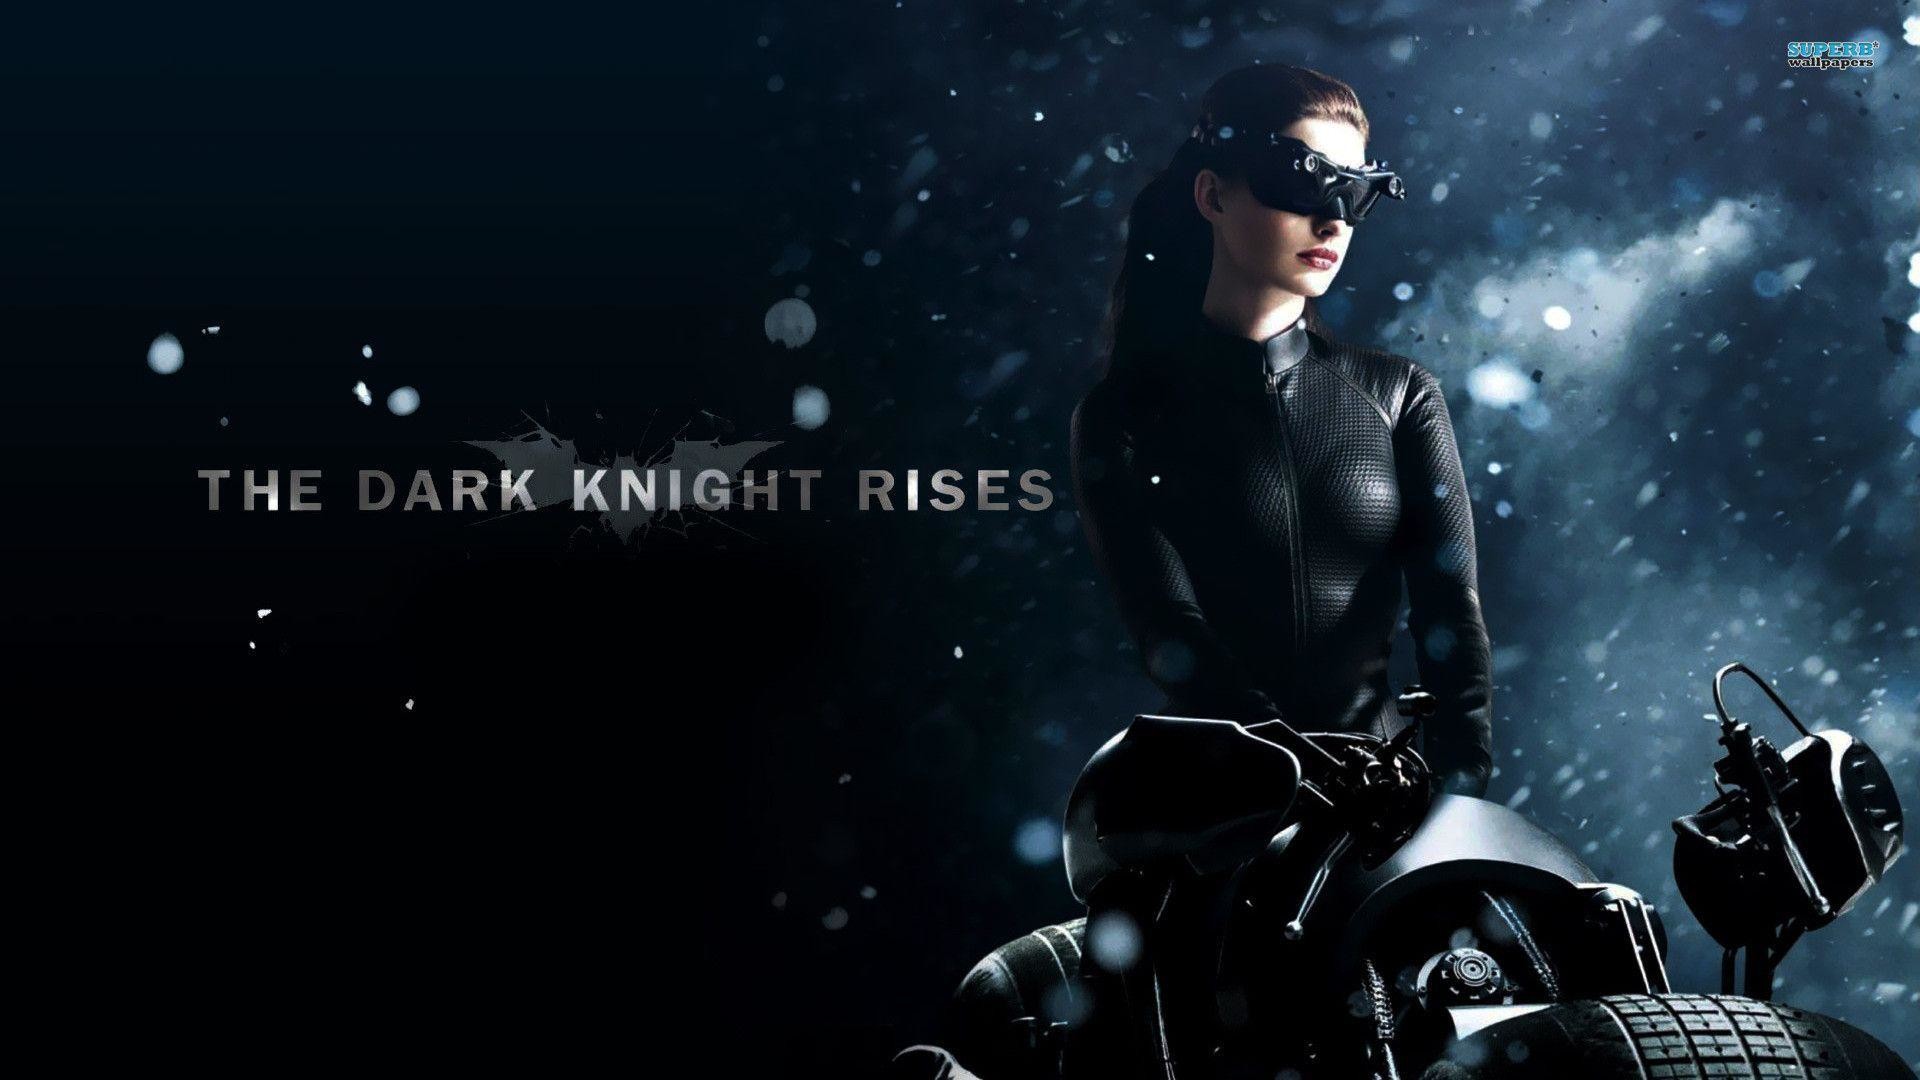 1920x1080 Catwoman - The Dark Knight Rises wallpaper - Movie wallpapers - #